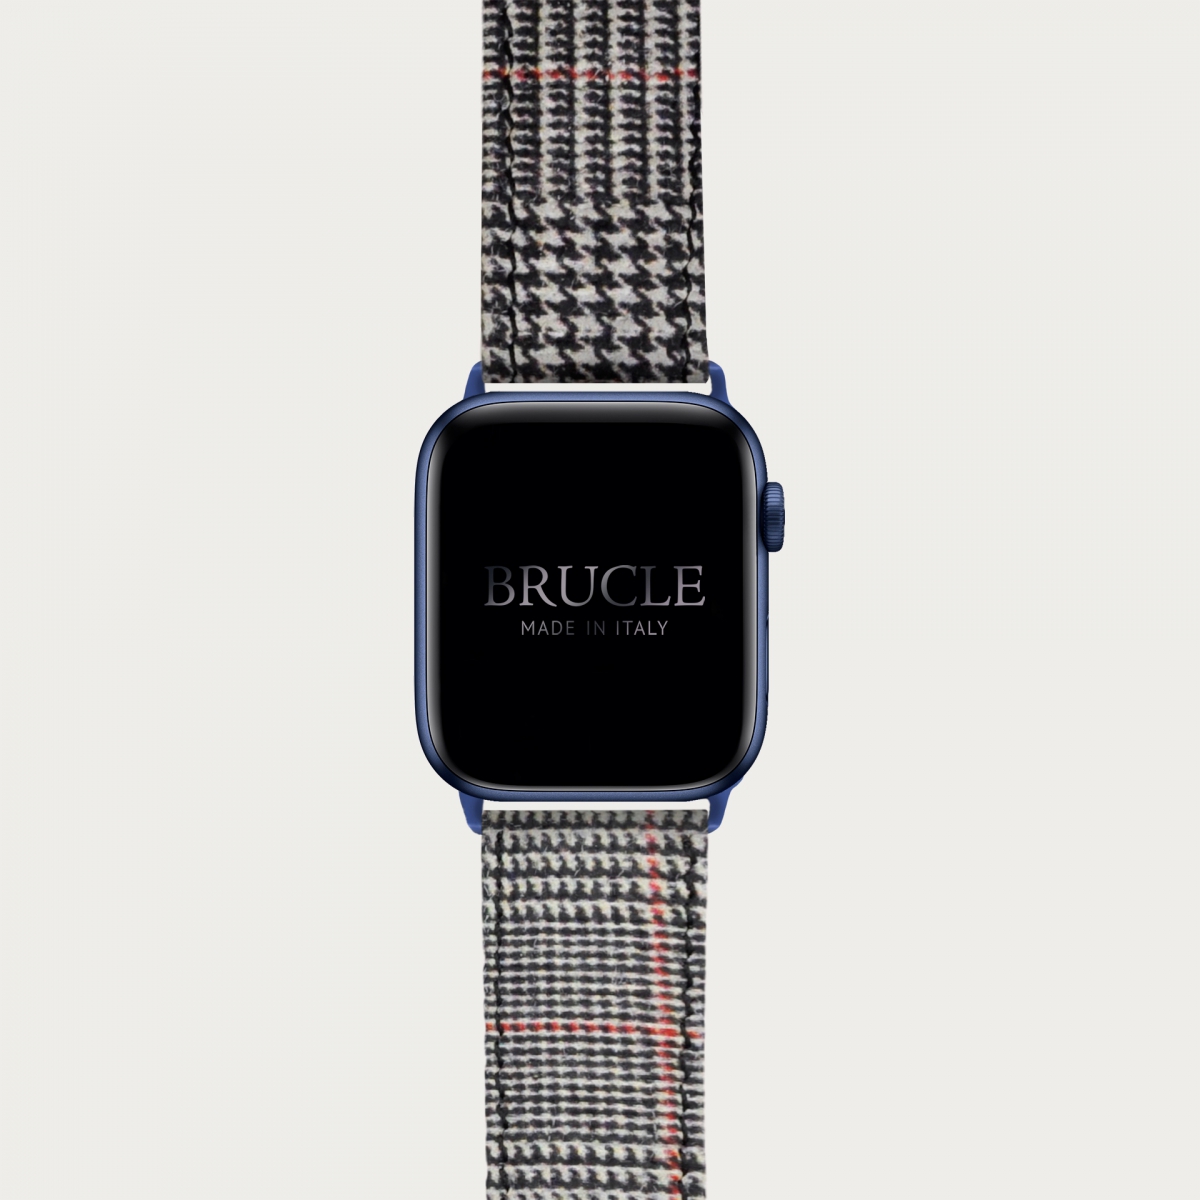 BRUCLE Leather Watch band compatible with Apple Watch / Samsung smartwatch, tartan print